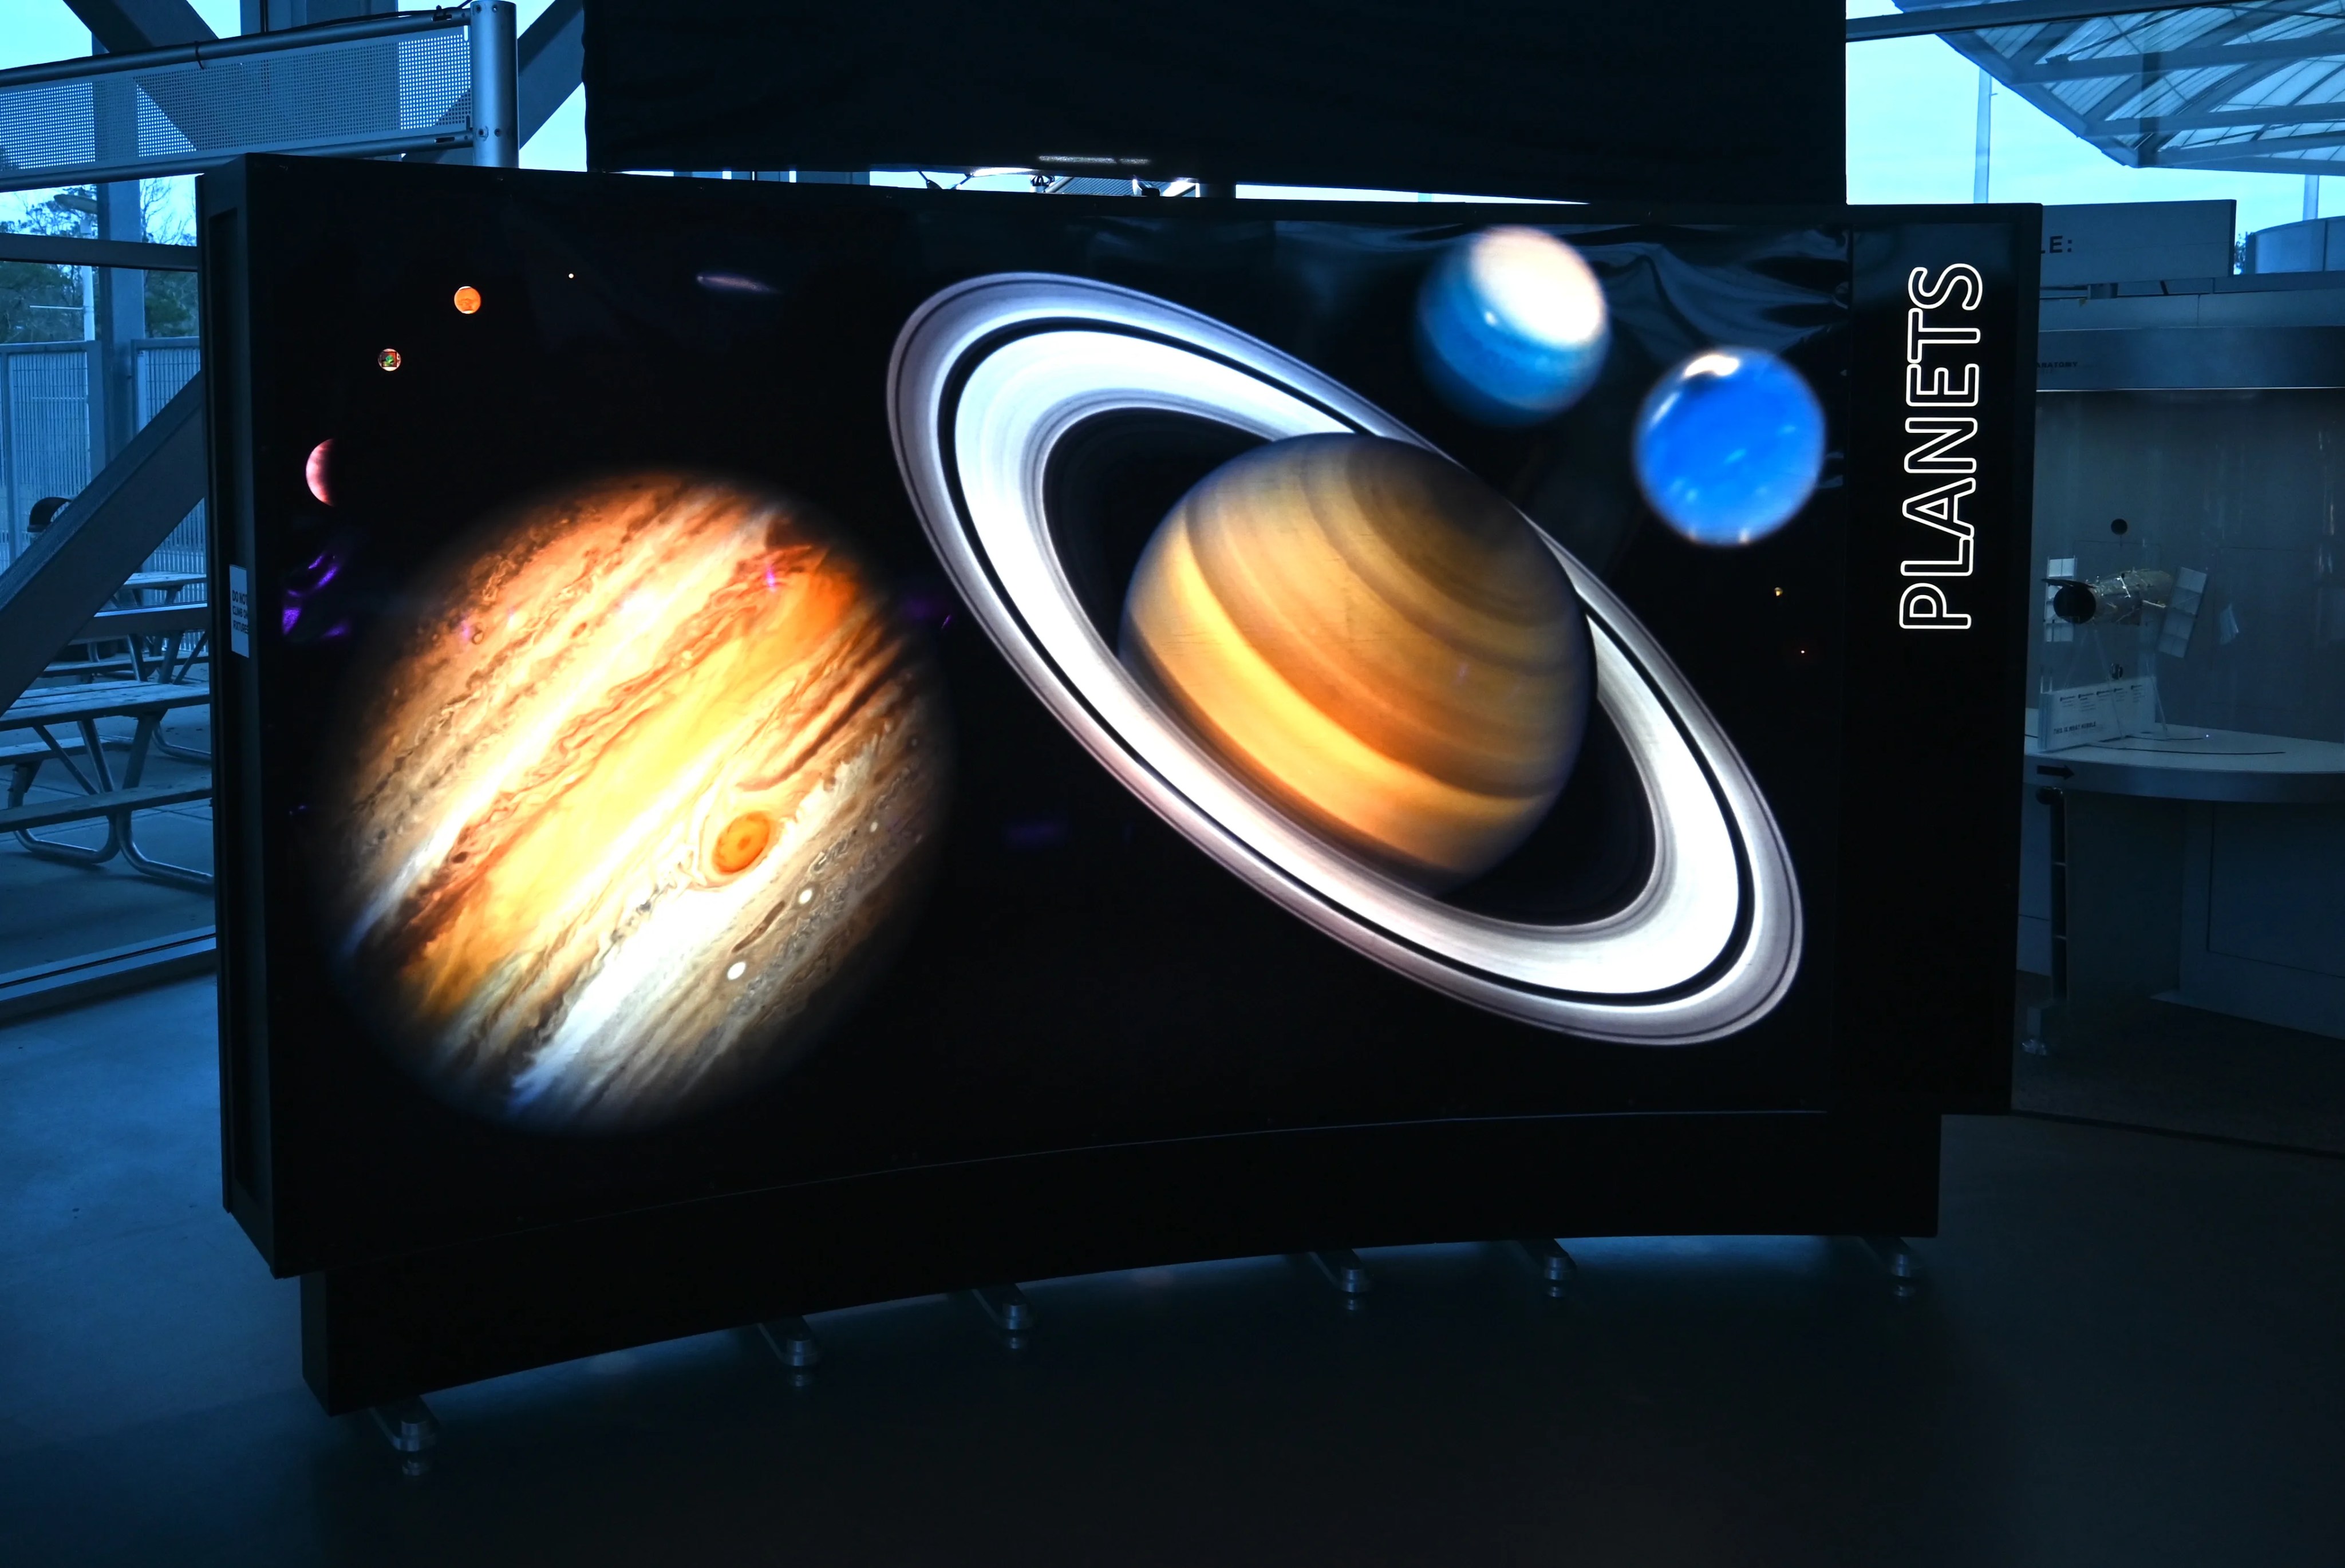 An 11 foot by 6 foot backlit image of a collage of planets